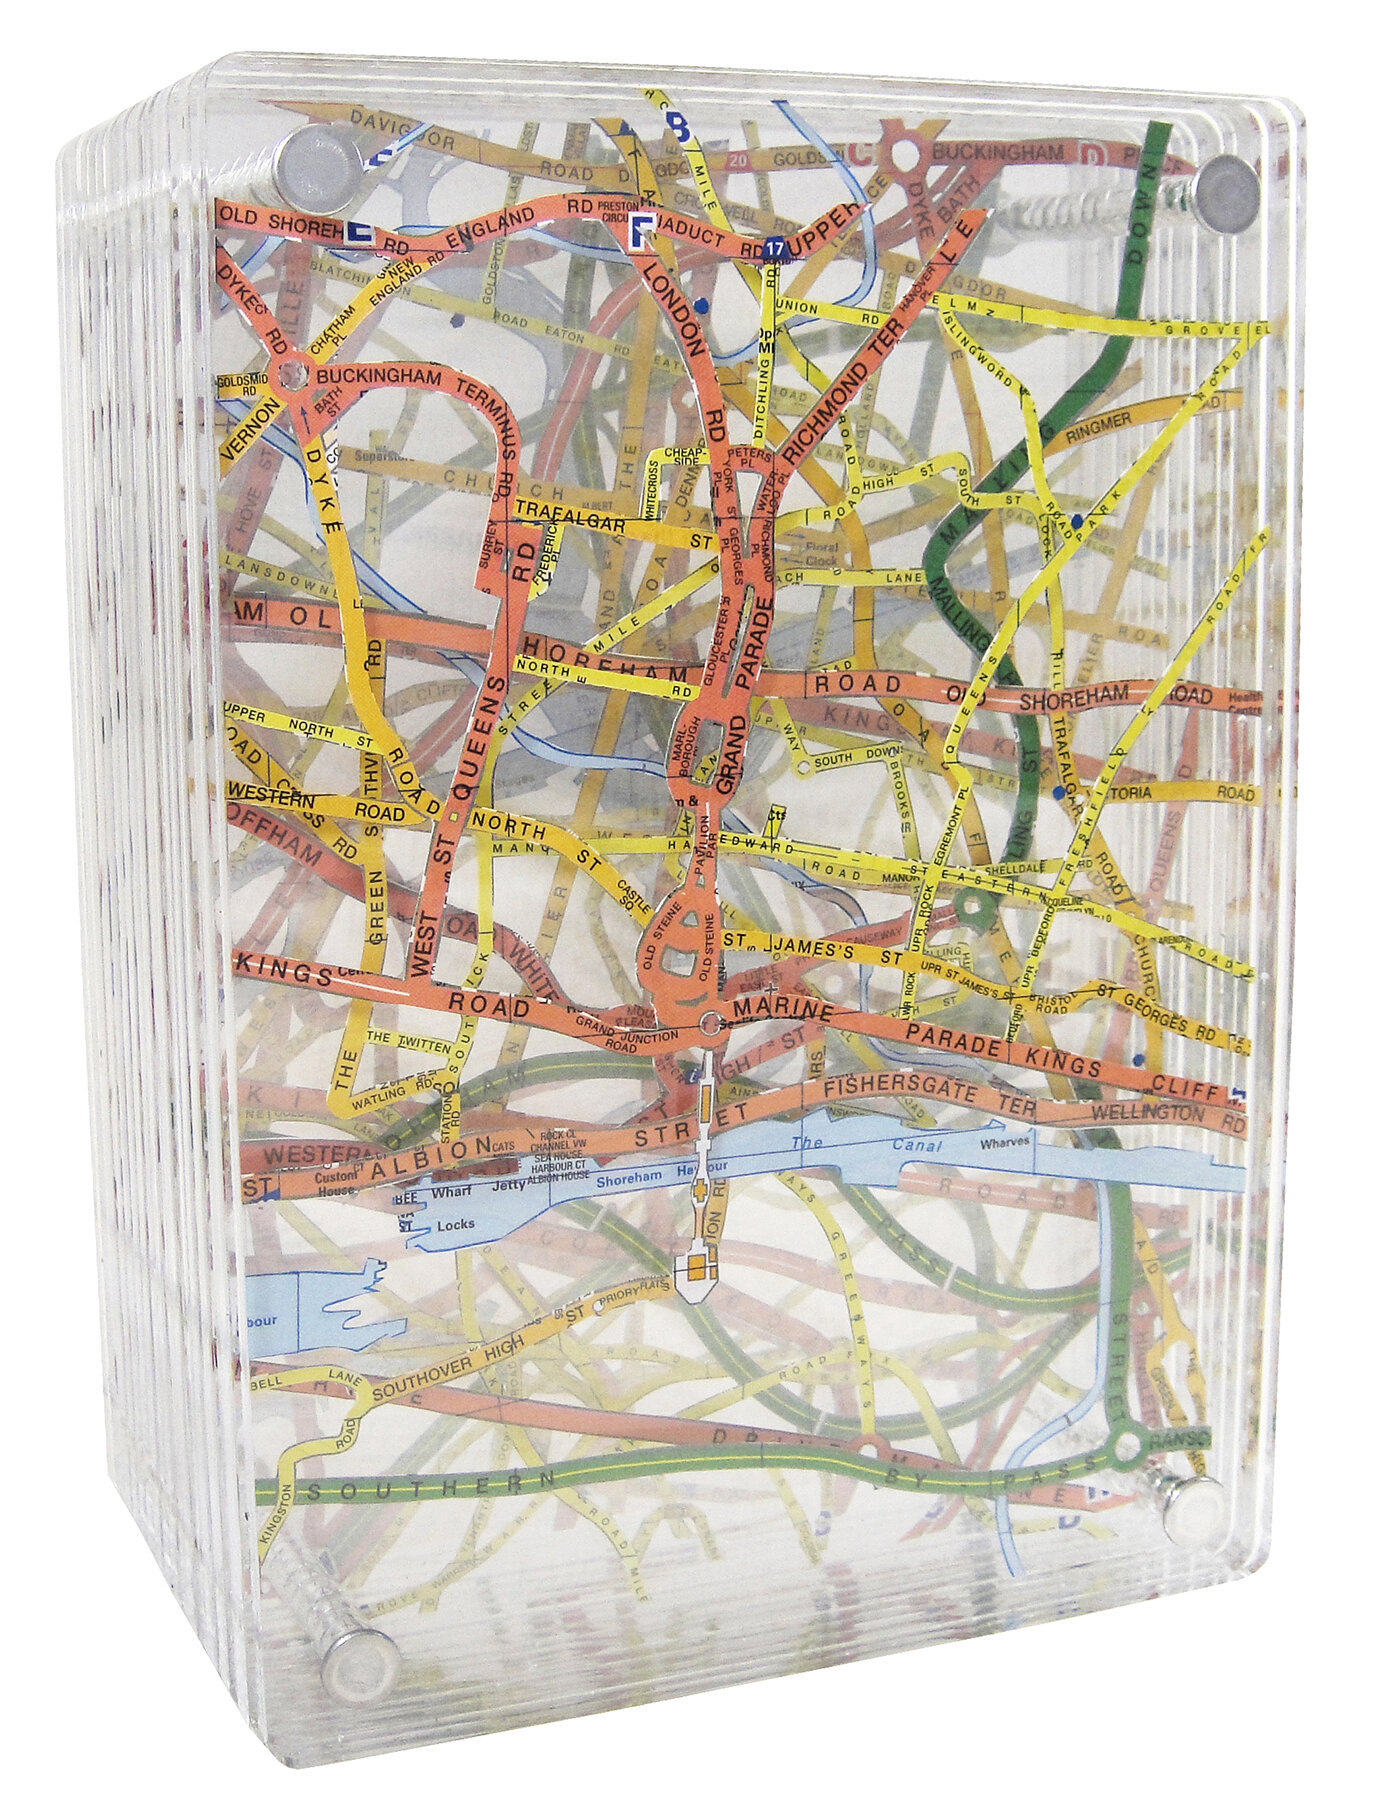   Carousel;   excavated vintage map, acrylic, metal;    7.75h x 5.5w x 1.5d inches 